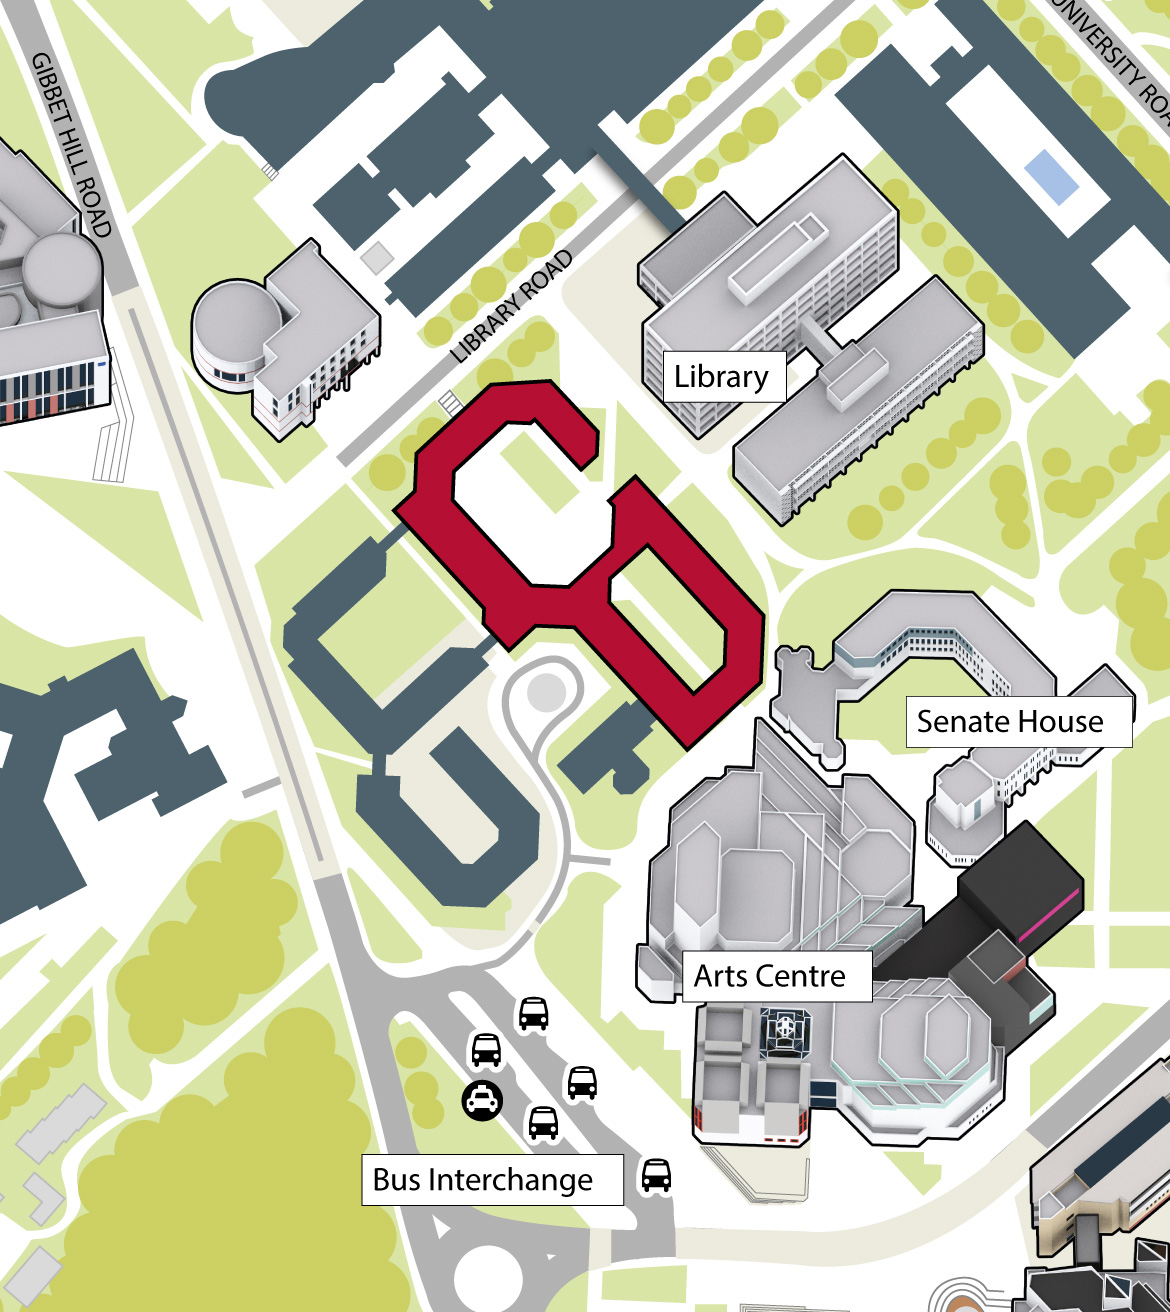 Map showing the section of Social Sciences that will be closed